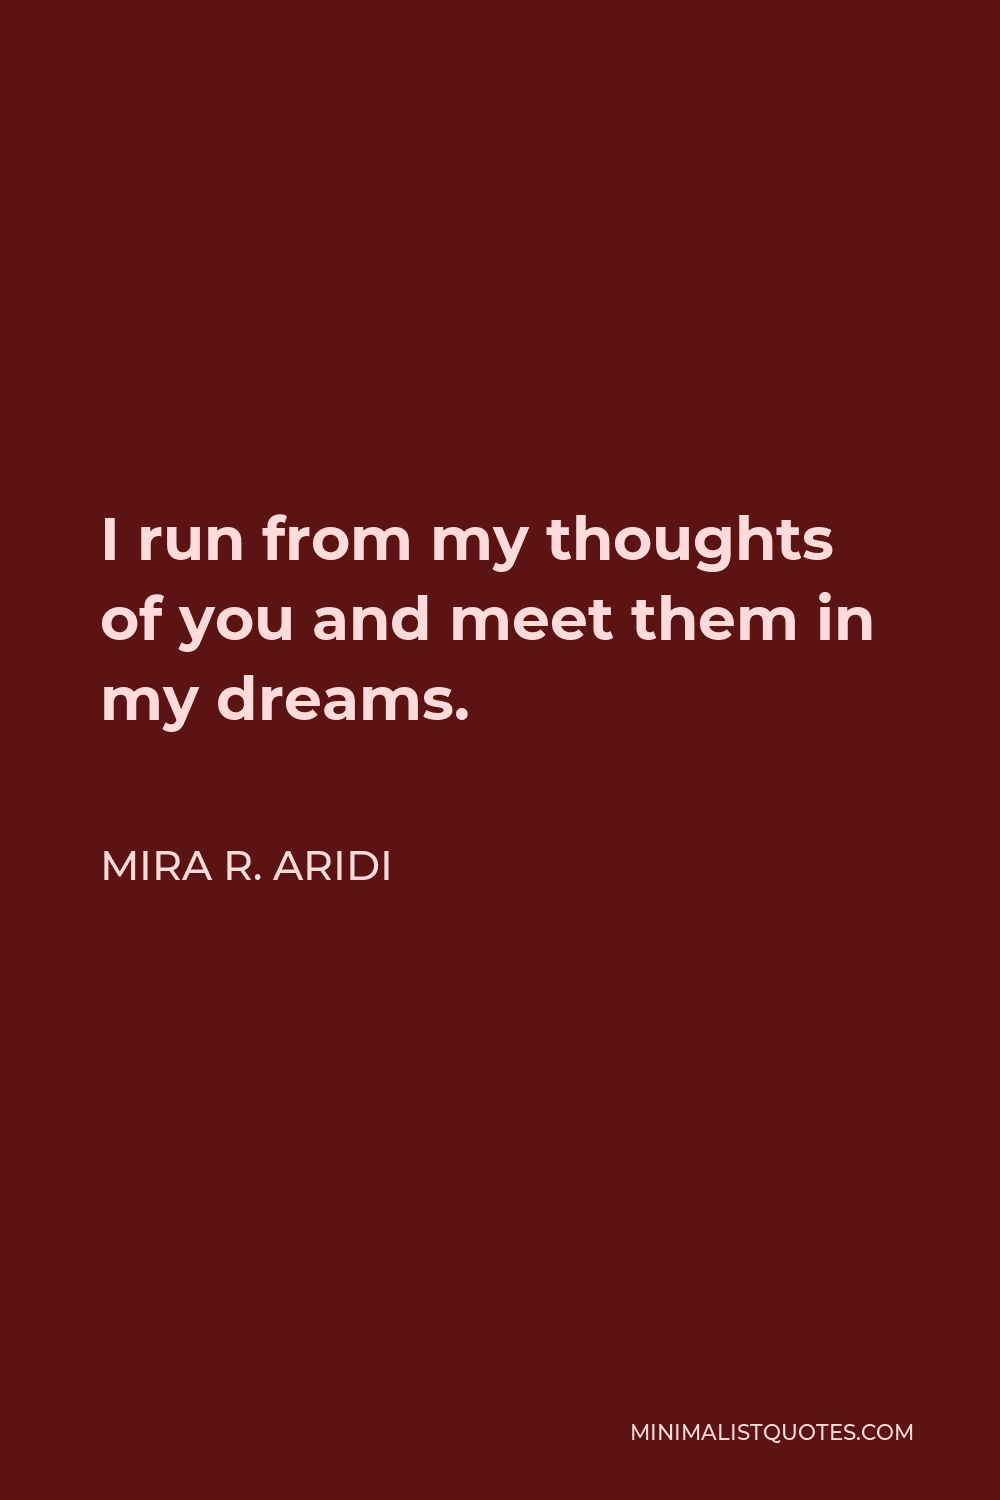 Mira R. Aridi Quote - I run from my thoughts of you and meet them in my dreams.